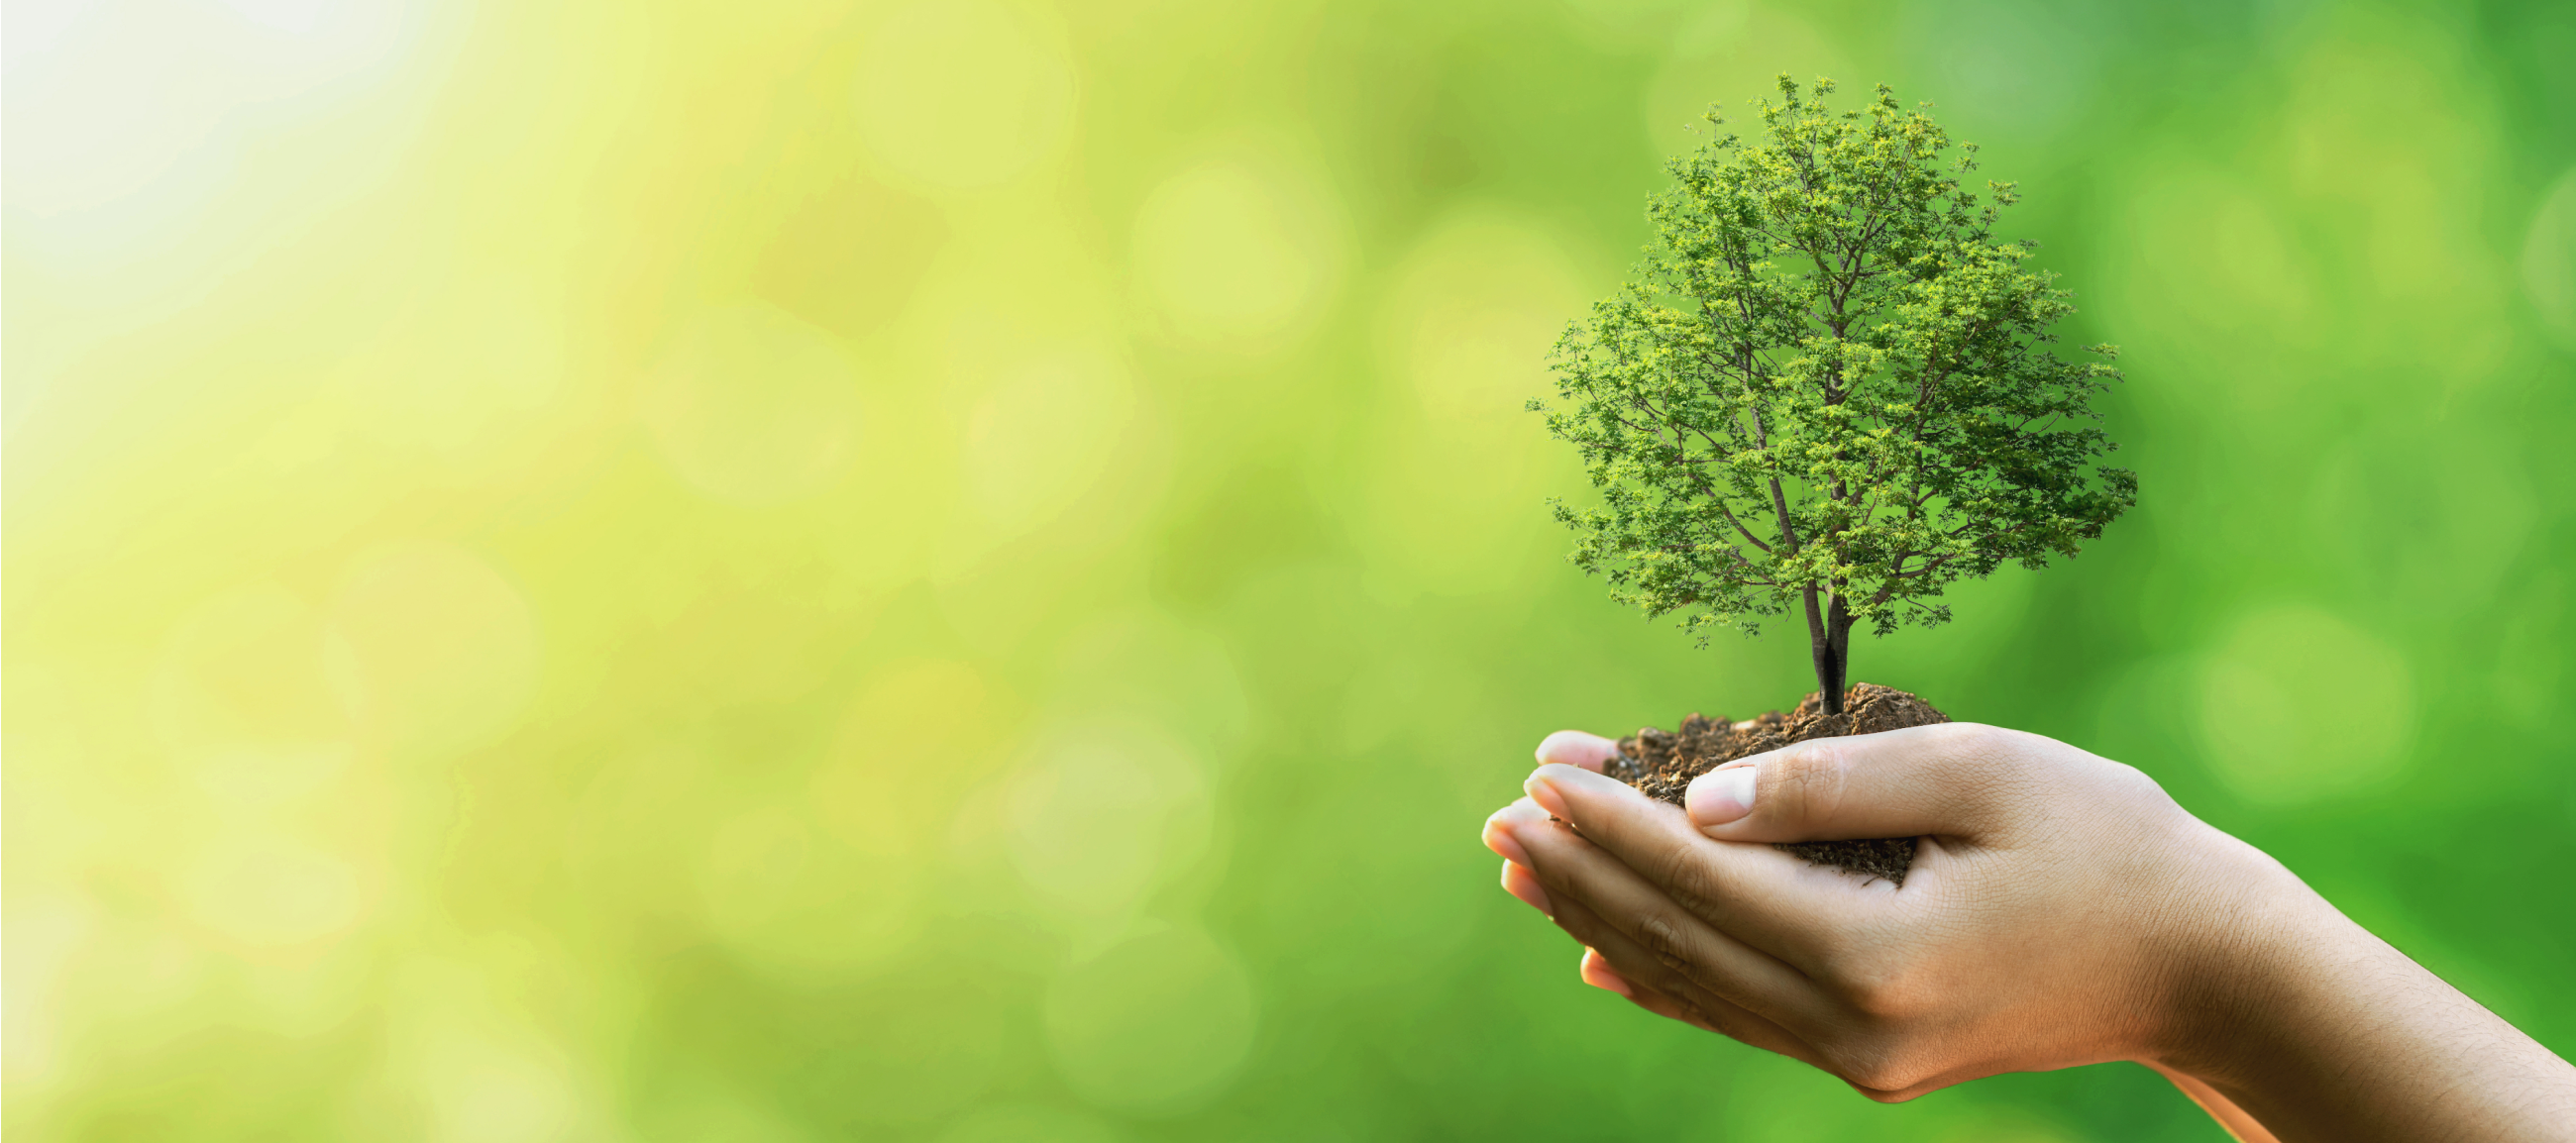 5 ways to reduce your environmental impact this Earth Day